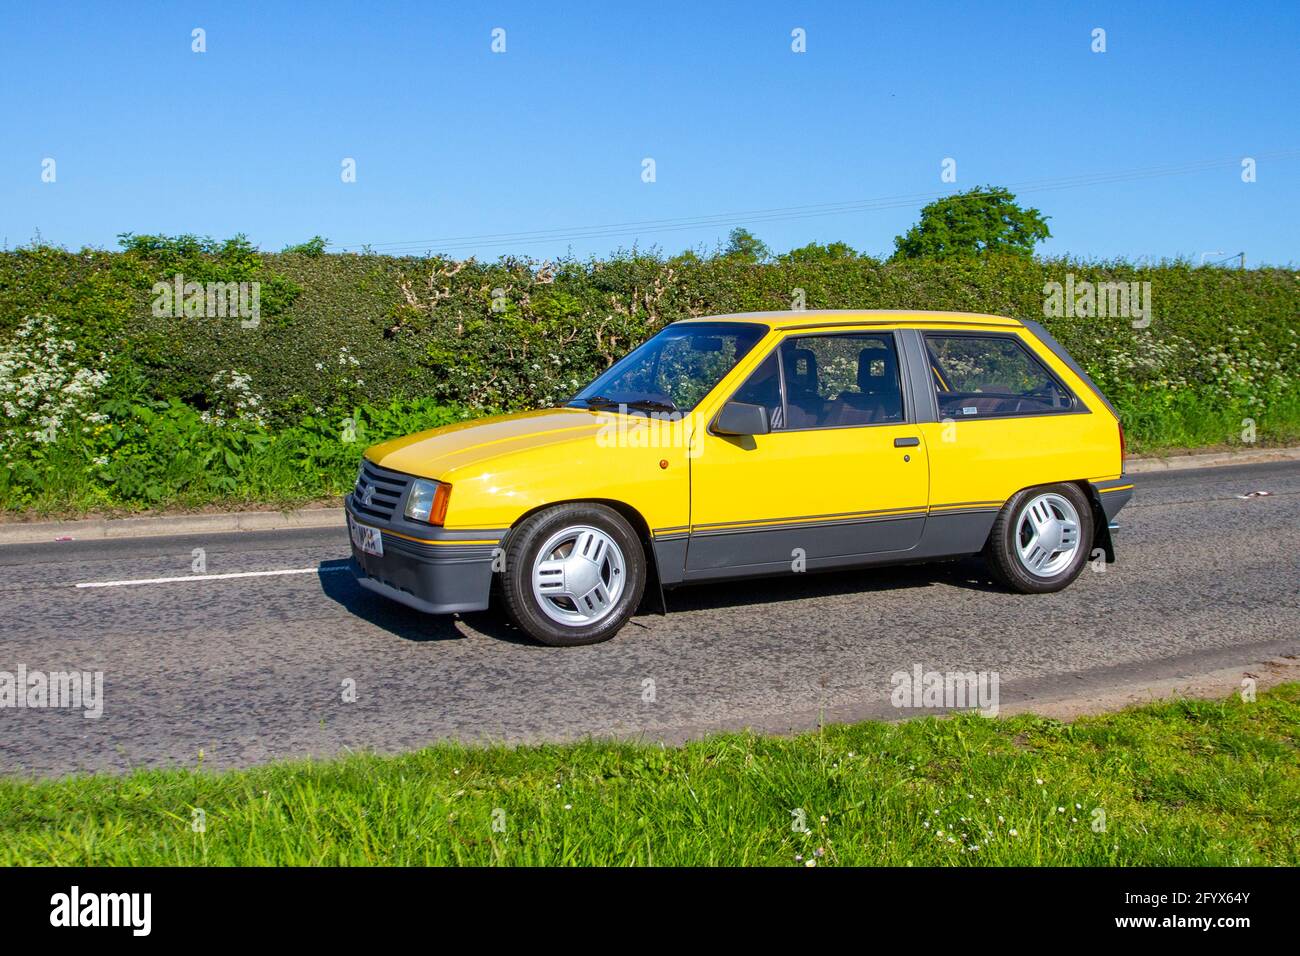 1983 80s eighties yellow Vauxhall Nova SR; Vehicular traffic, moving vehicles, cars, vehicle driving on UK roads, motors, motoring  en-route to Capesthorne Hall classic May car show, Cheshire, UK Stock Photo